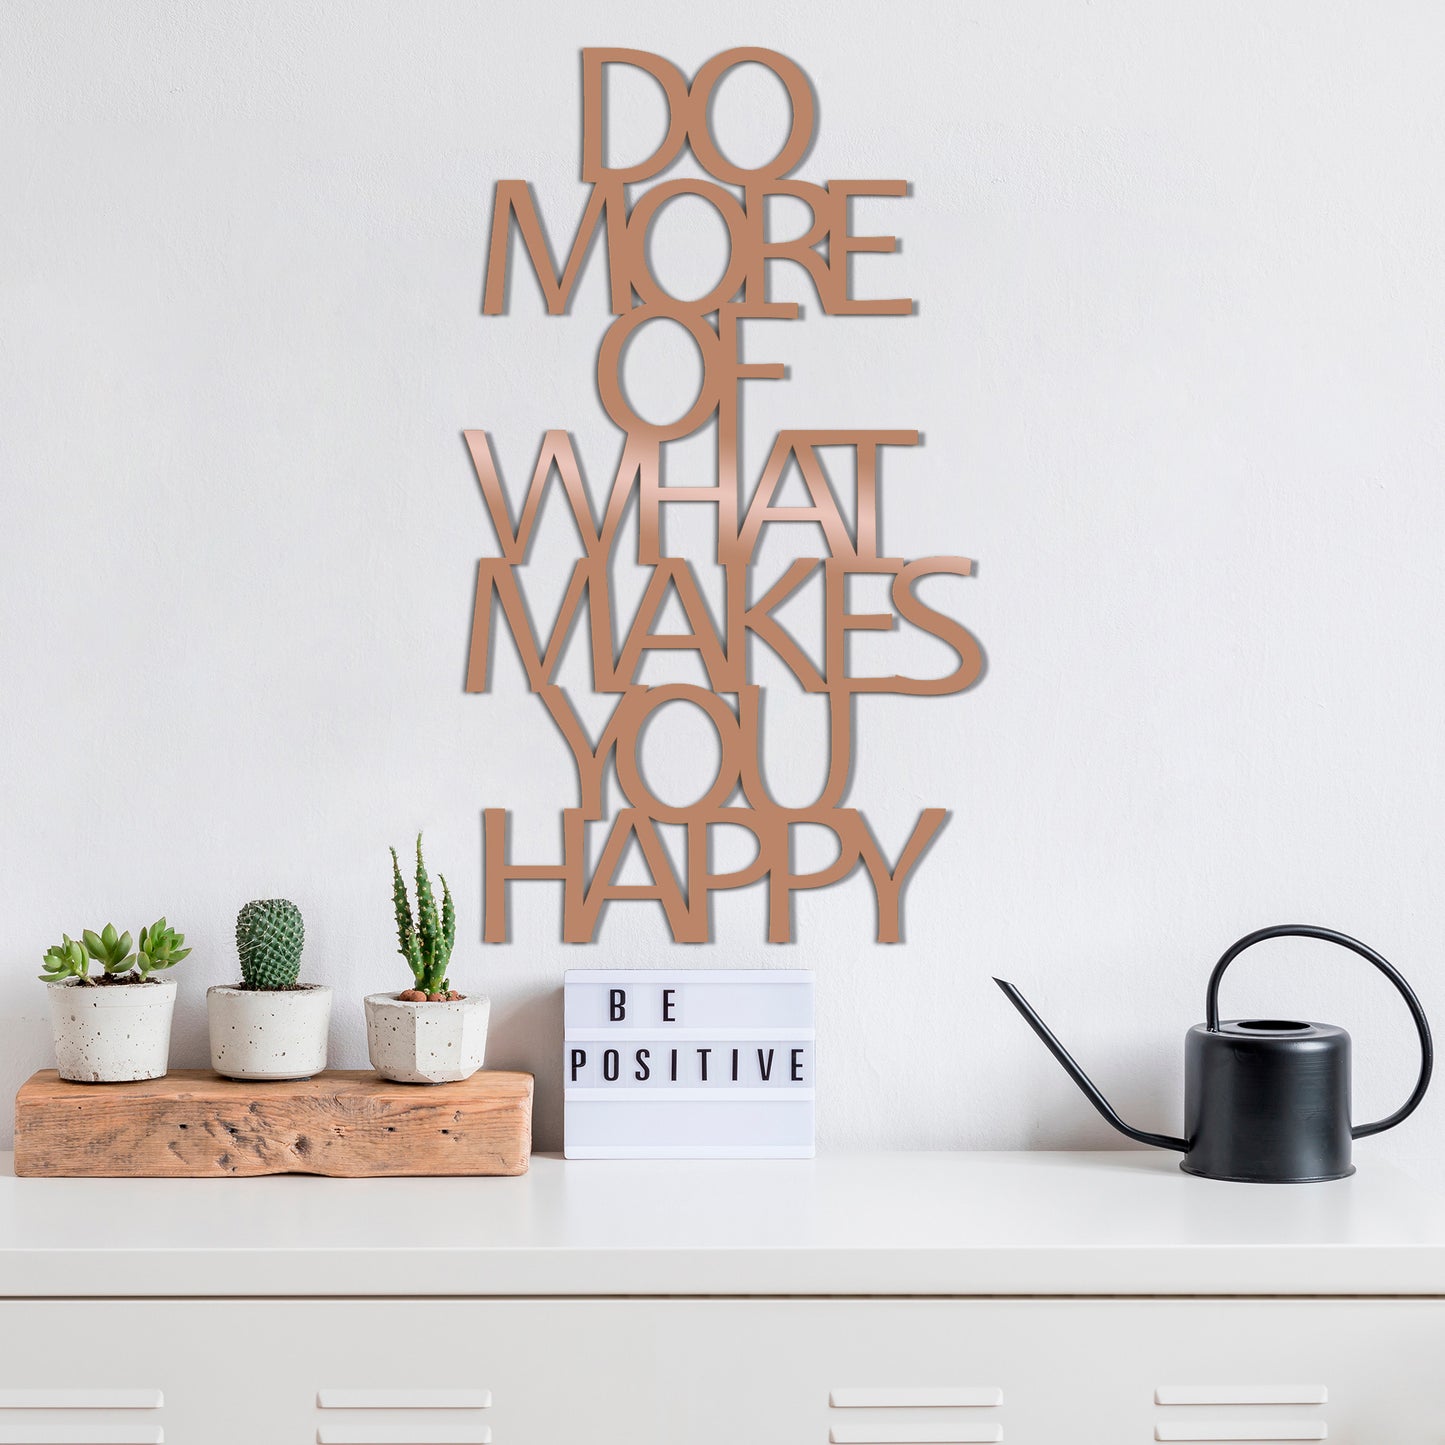 DO MORE OF WHAT MAKES YOU HAPPY - COPPER